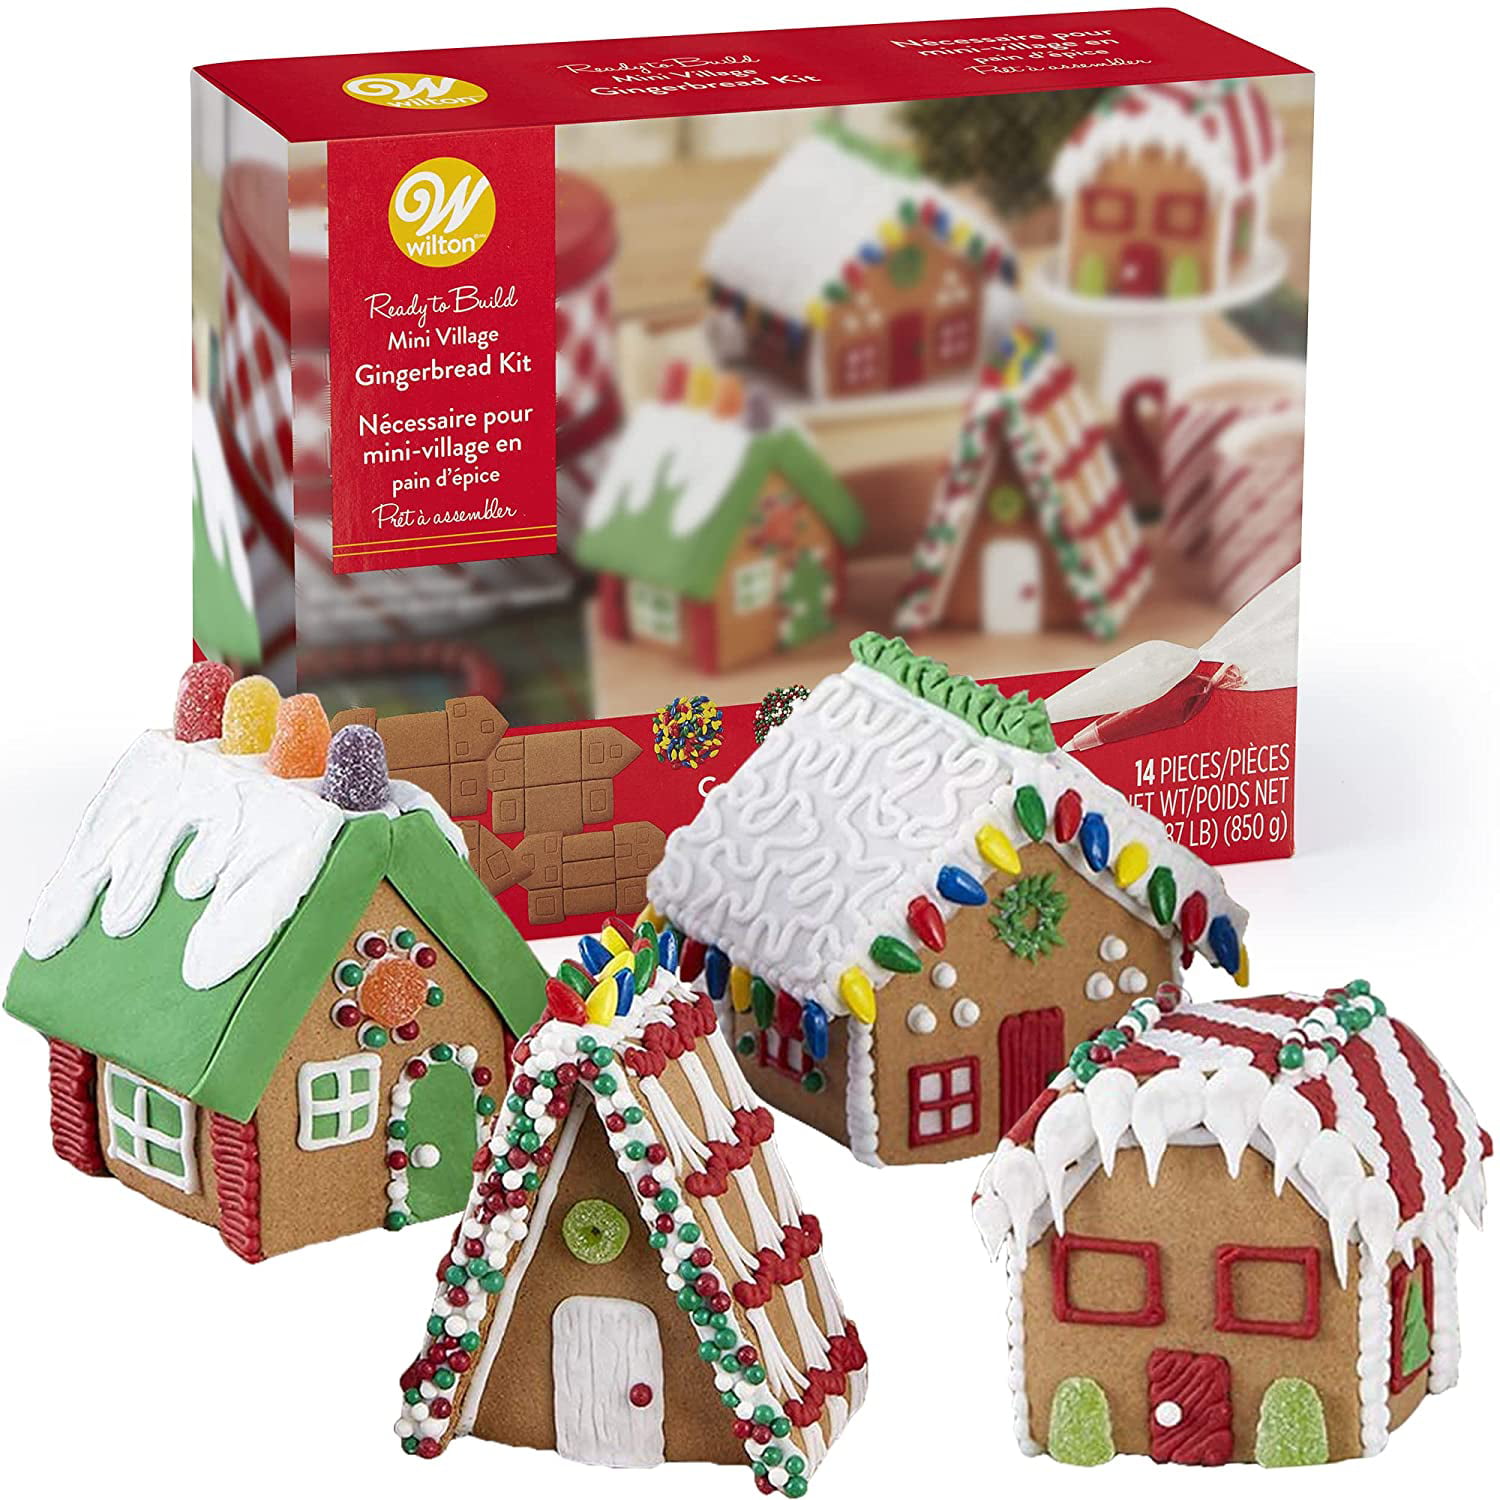 Wooden Food Play Set Kids Kitchen Pretend Christmas Cookies Gingerbread House 